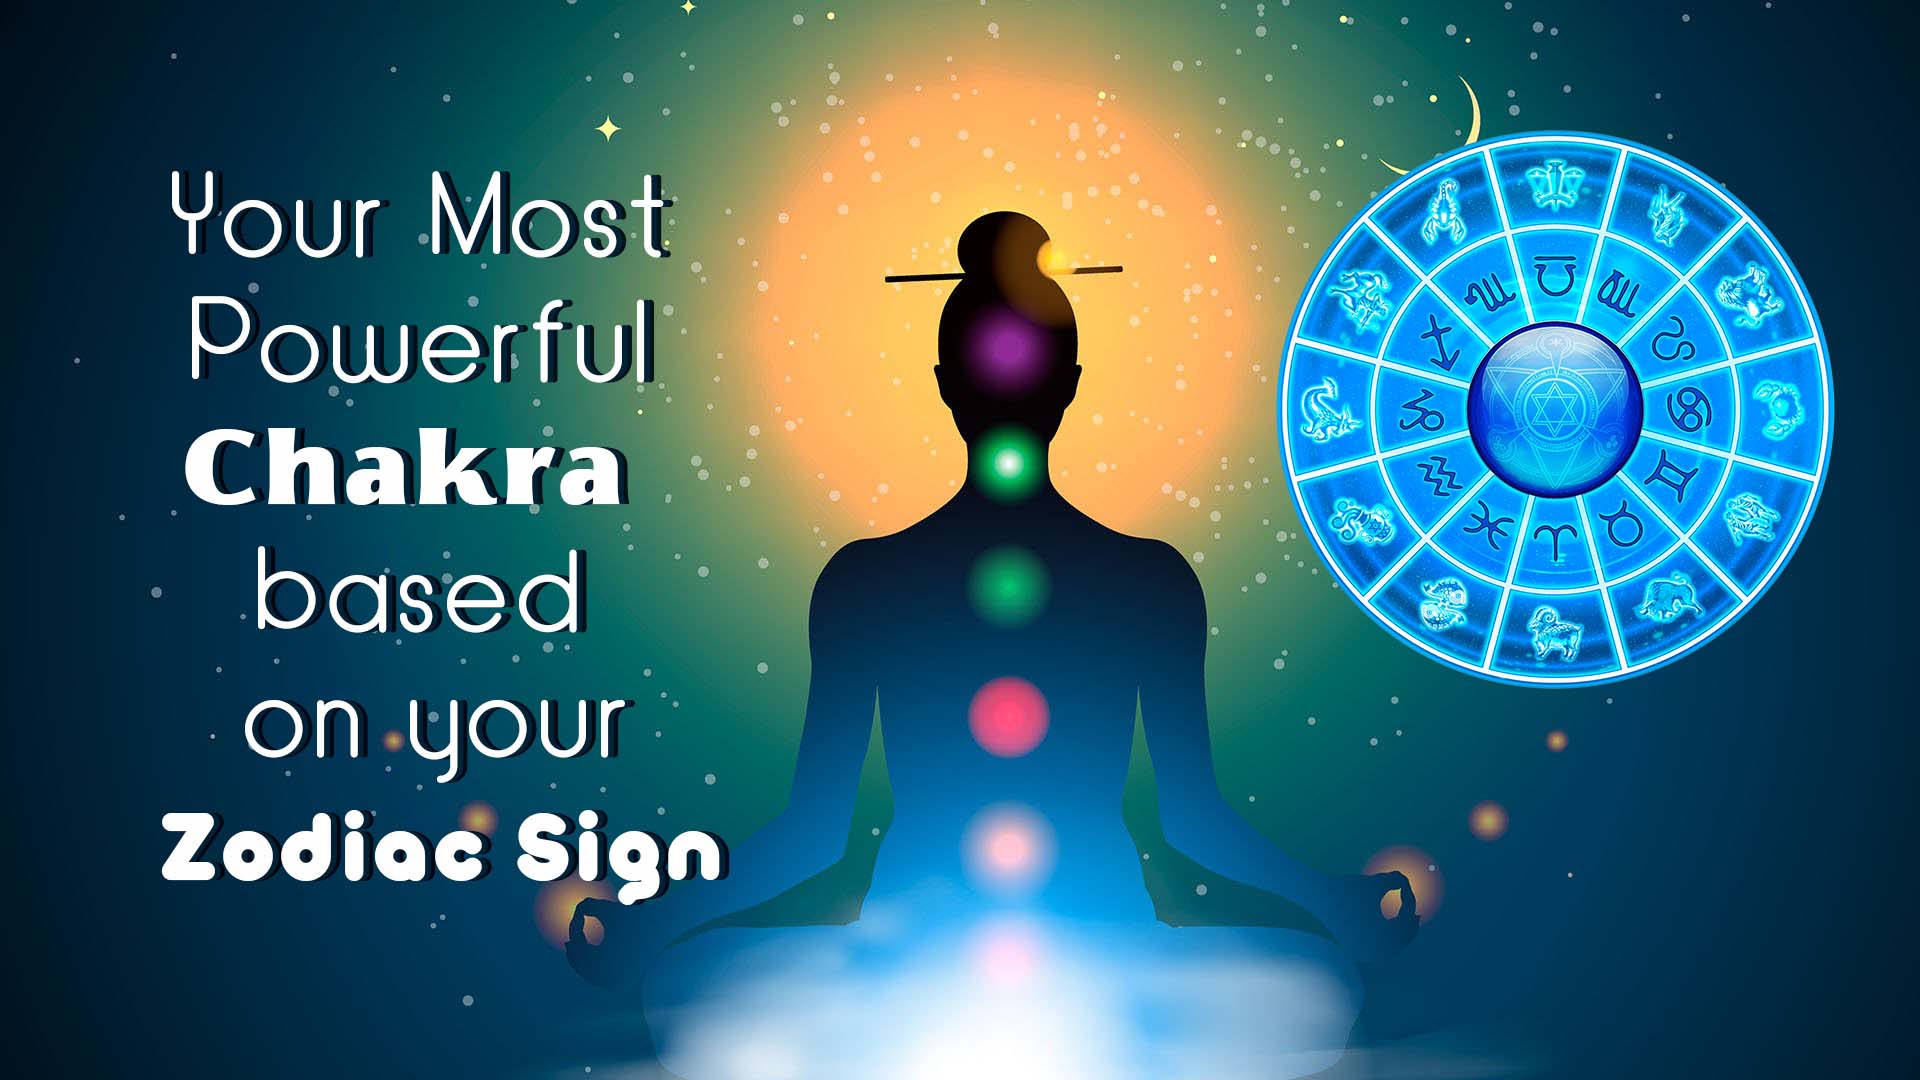 Your Most Powerful Chakra based on your Zodiac Sign